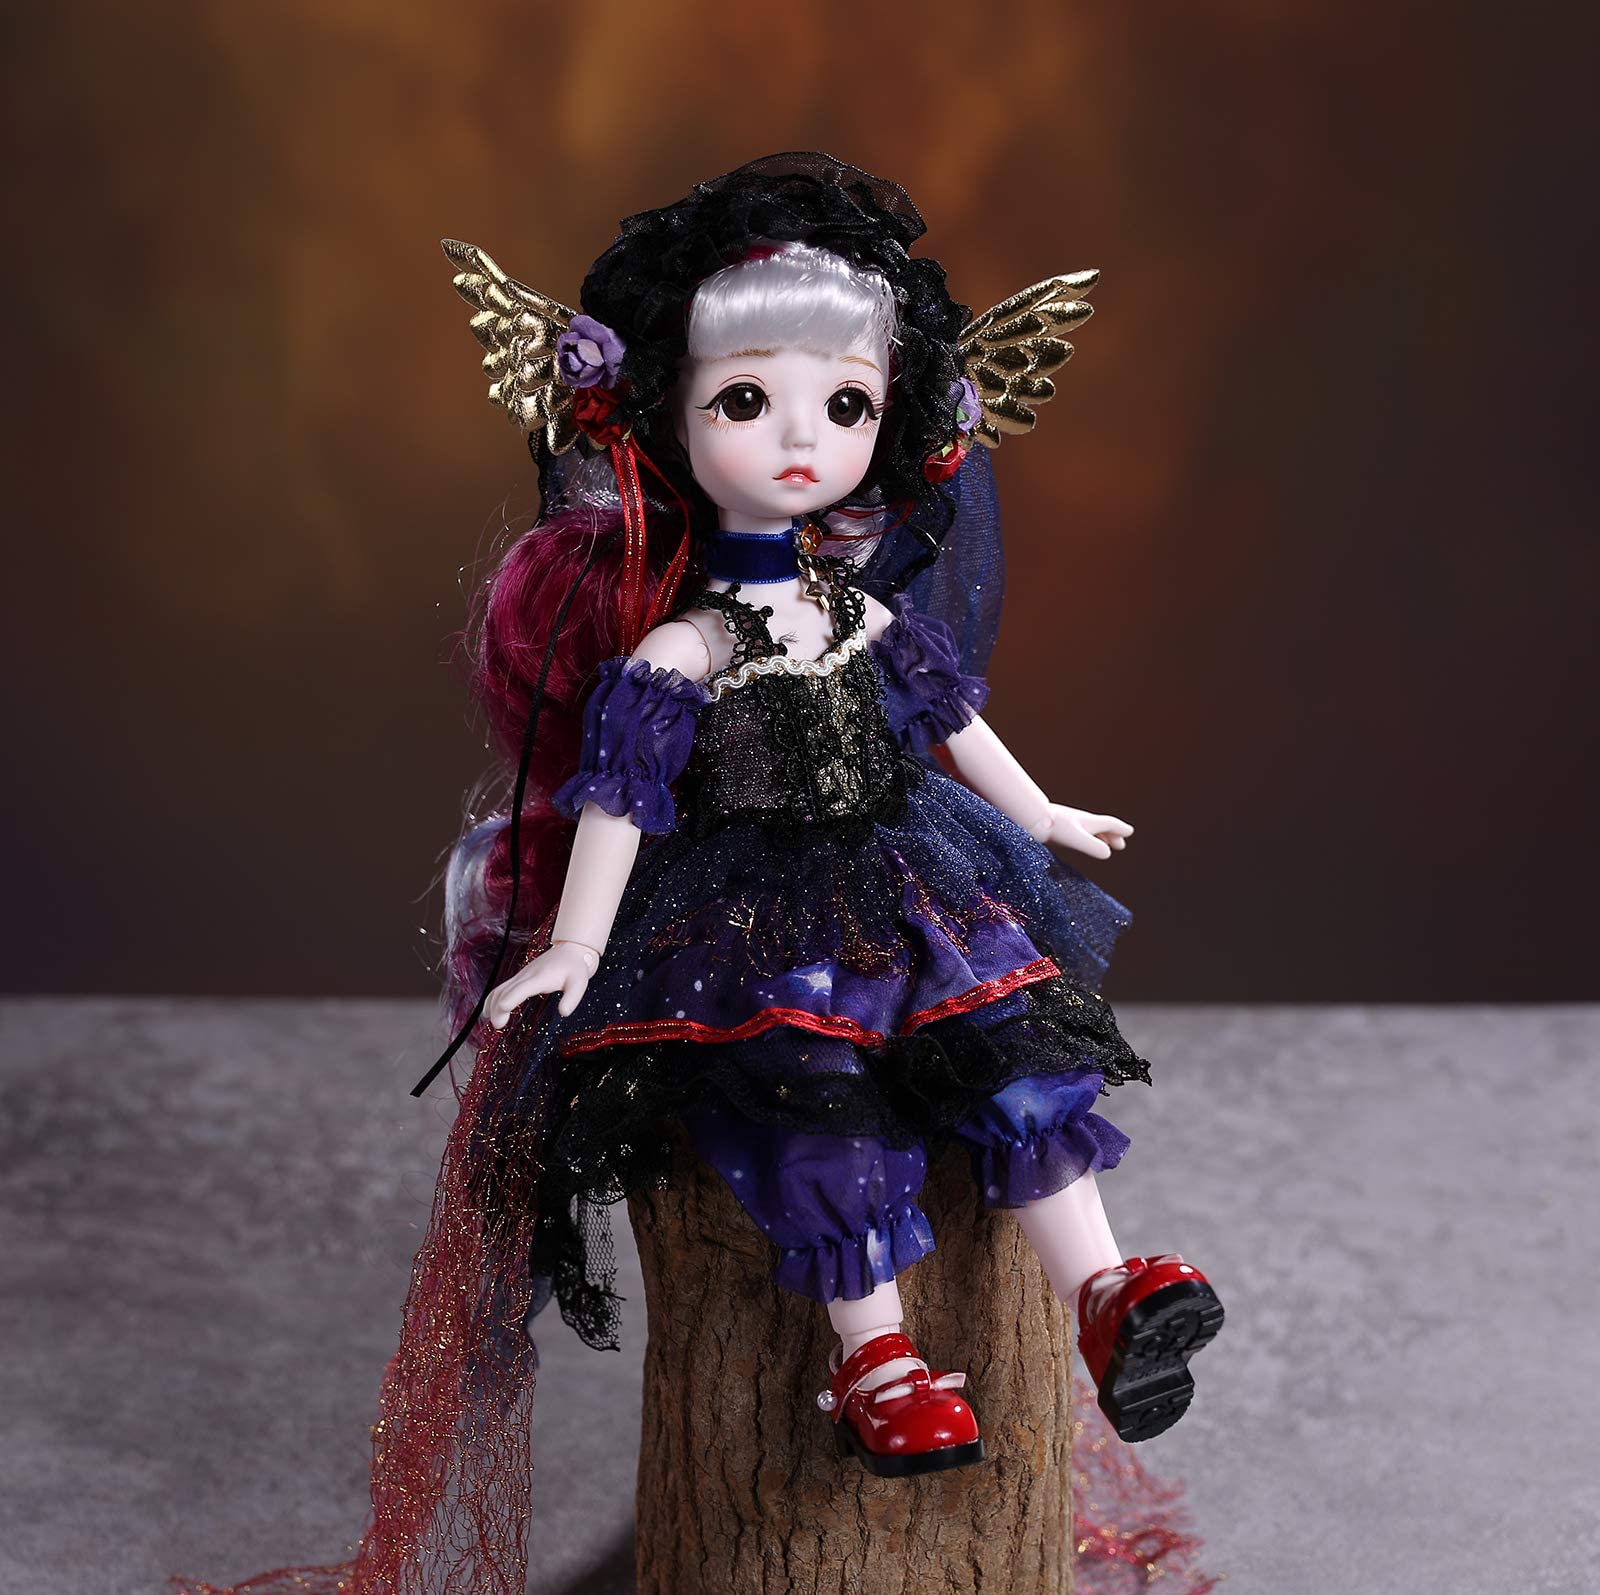 Mua Aongneer Anime Doll 1/6 BJD Dolls 12 Inch Ball Jointed Doll with  Special Doll Clothes, Accessories, Wig, Cute Smart Dolls for 7 Years Old  Girls as New Year's Gift -Black Angel